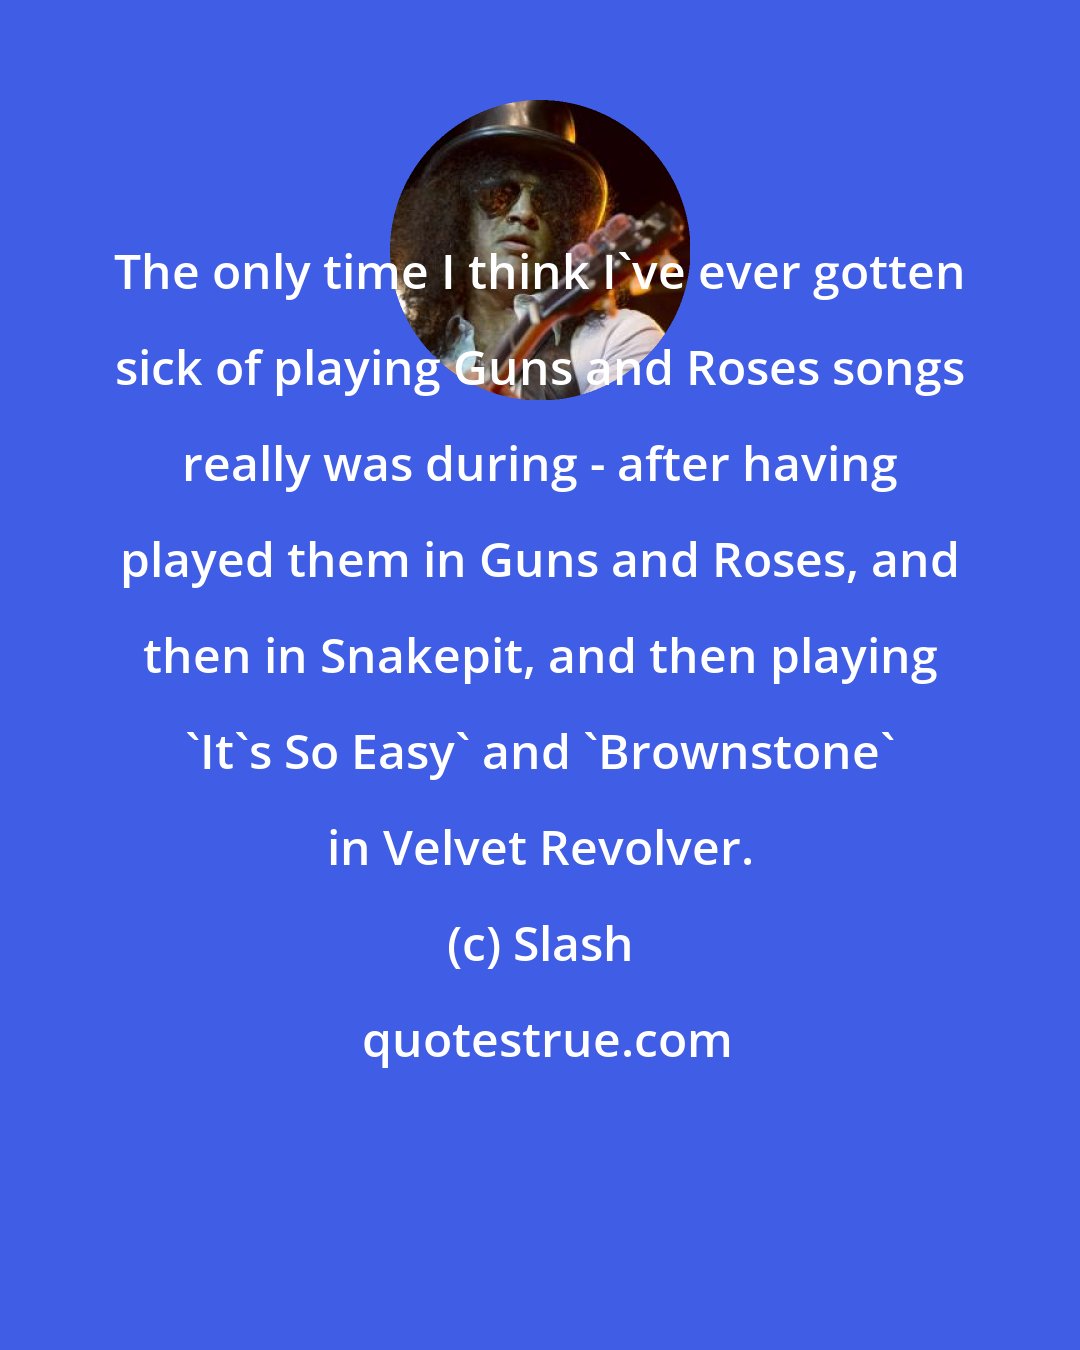 Slash: The only time I think I've ever gotten sick of playing Guns and Roses songs really was during - after having played them in Guns and Roses, and then in Snakepit, and then playing 'It's So Easy' and 'Brownstone' in Velvet Revolver.